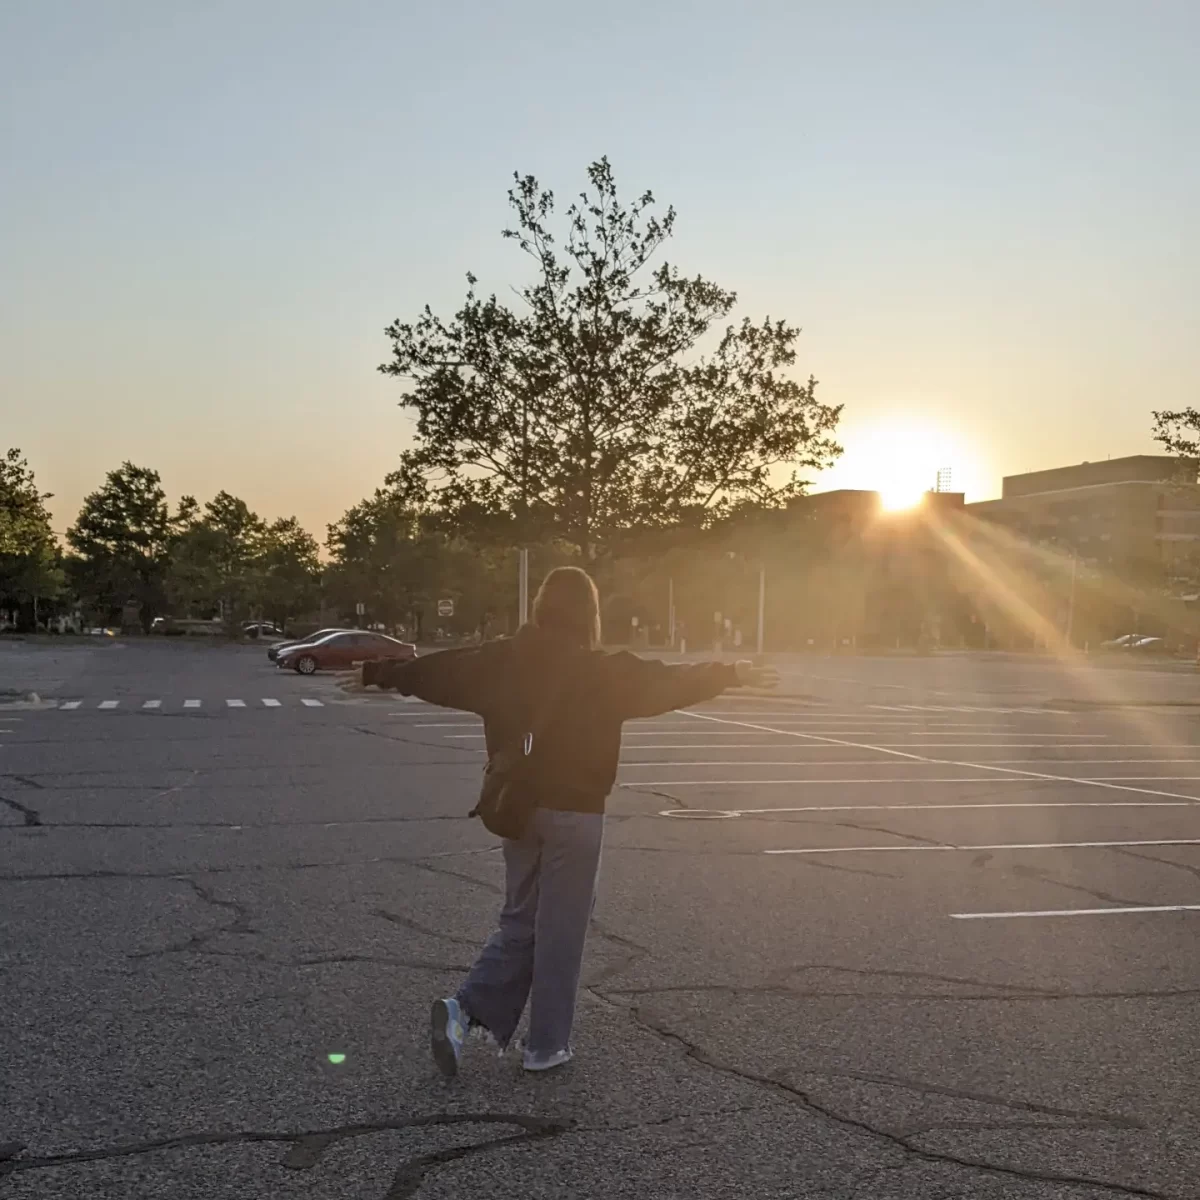 Its+a+silhouette+photo+of+you+in+a+parking+lot+at+sunset%3B+thats+dramatic.+-Sofia+Hargis-Acevedo